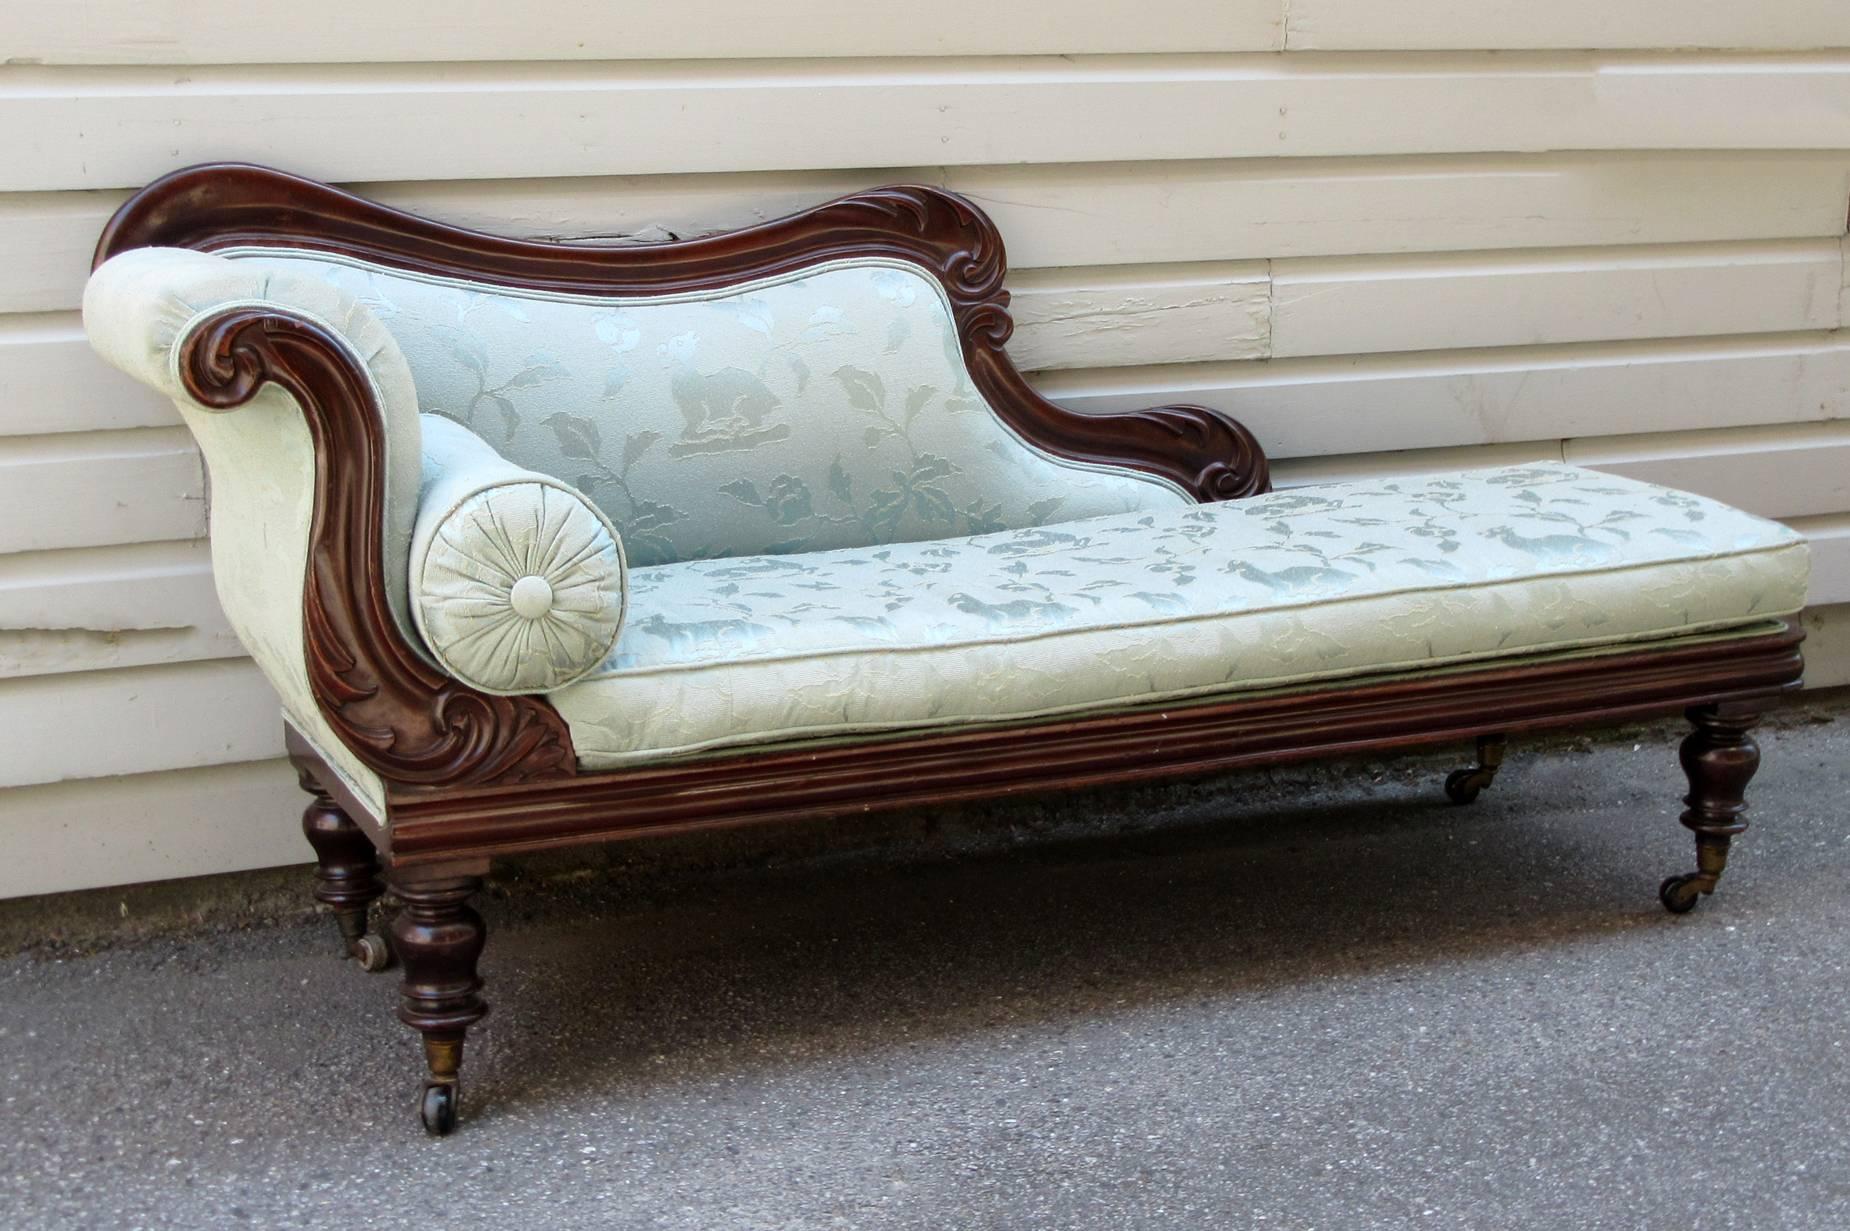 A Caribbean 19th century Jamaican Regency mahogany and upholstered recamier, circa 1830, featuring scroll arm and stylized carvings of lotus and foliage motifs. The casters are original to the chaise longue and the pale blue damask upholstery has